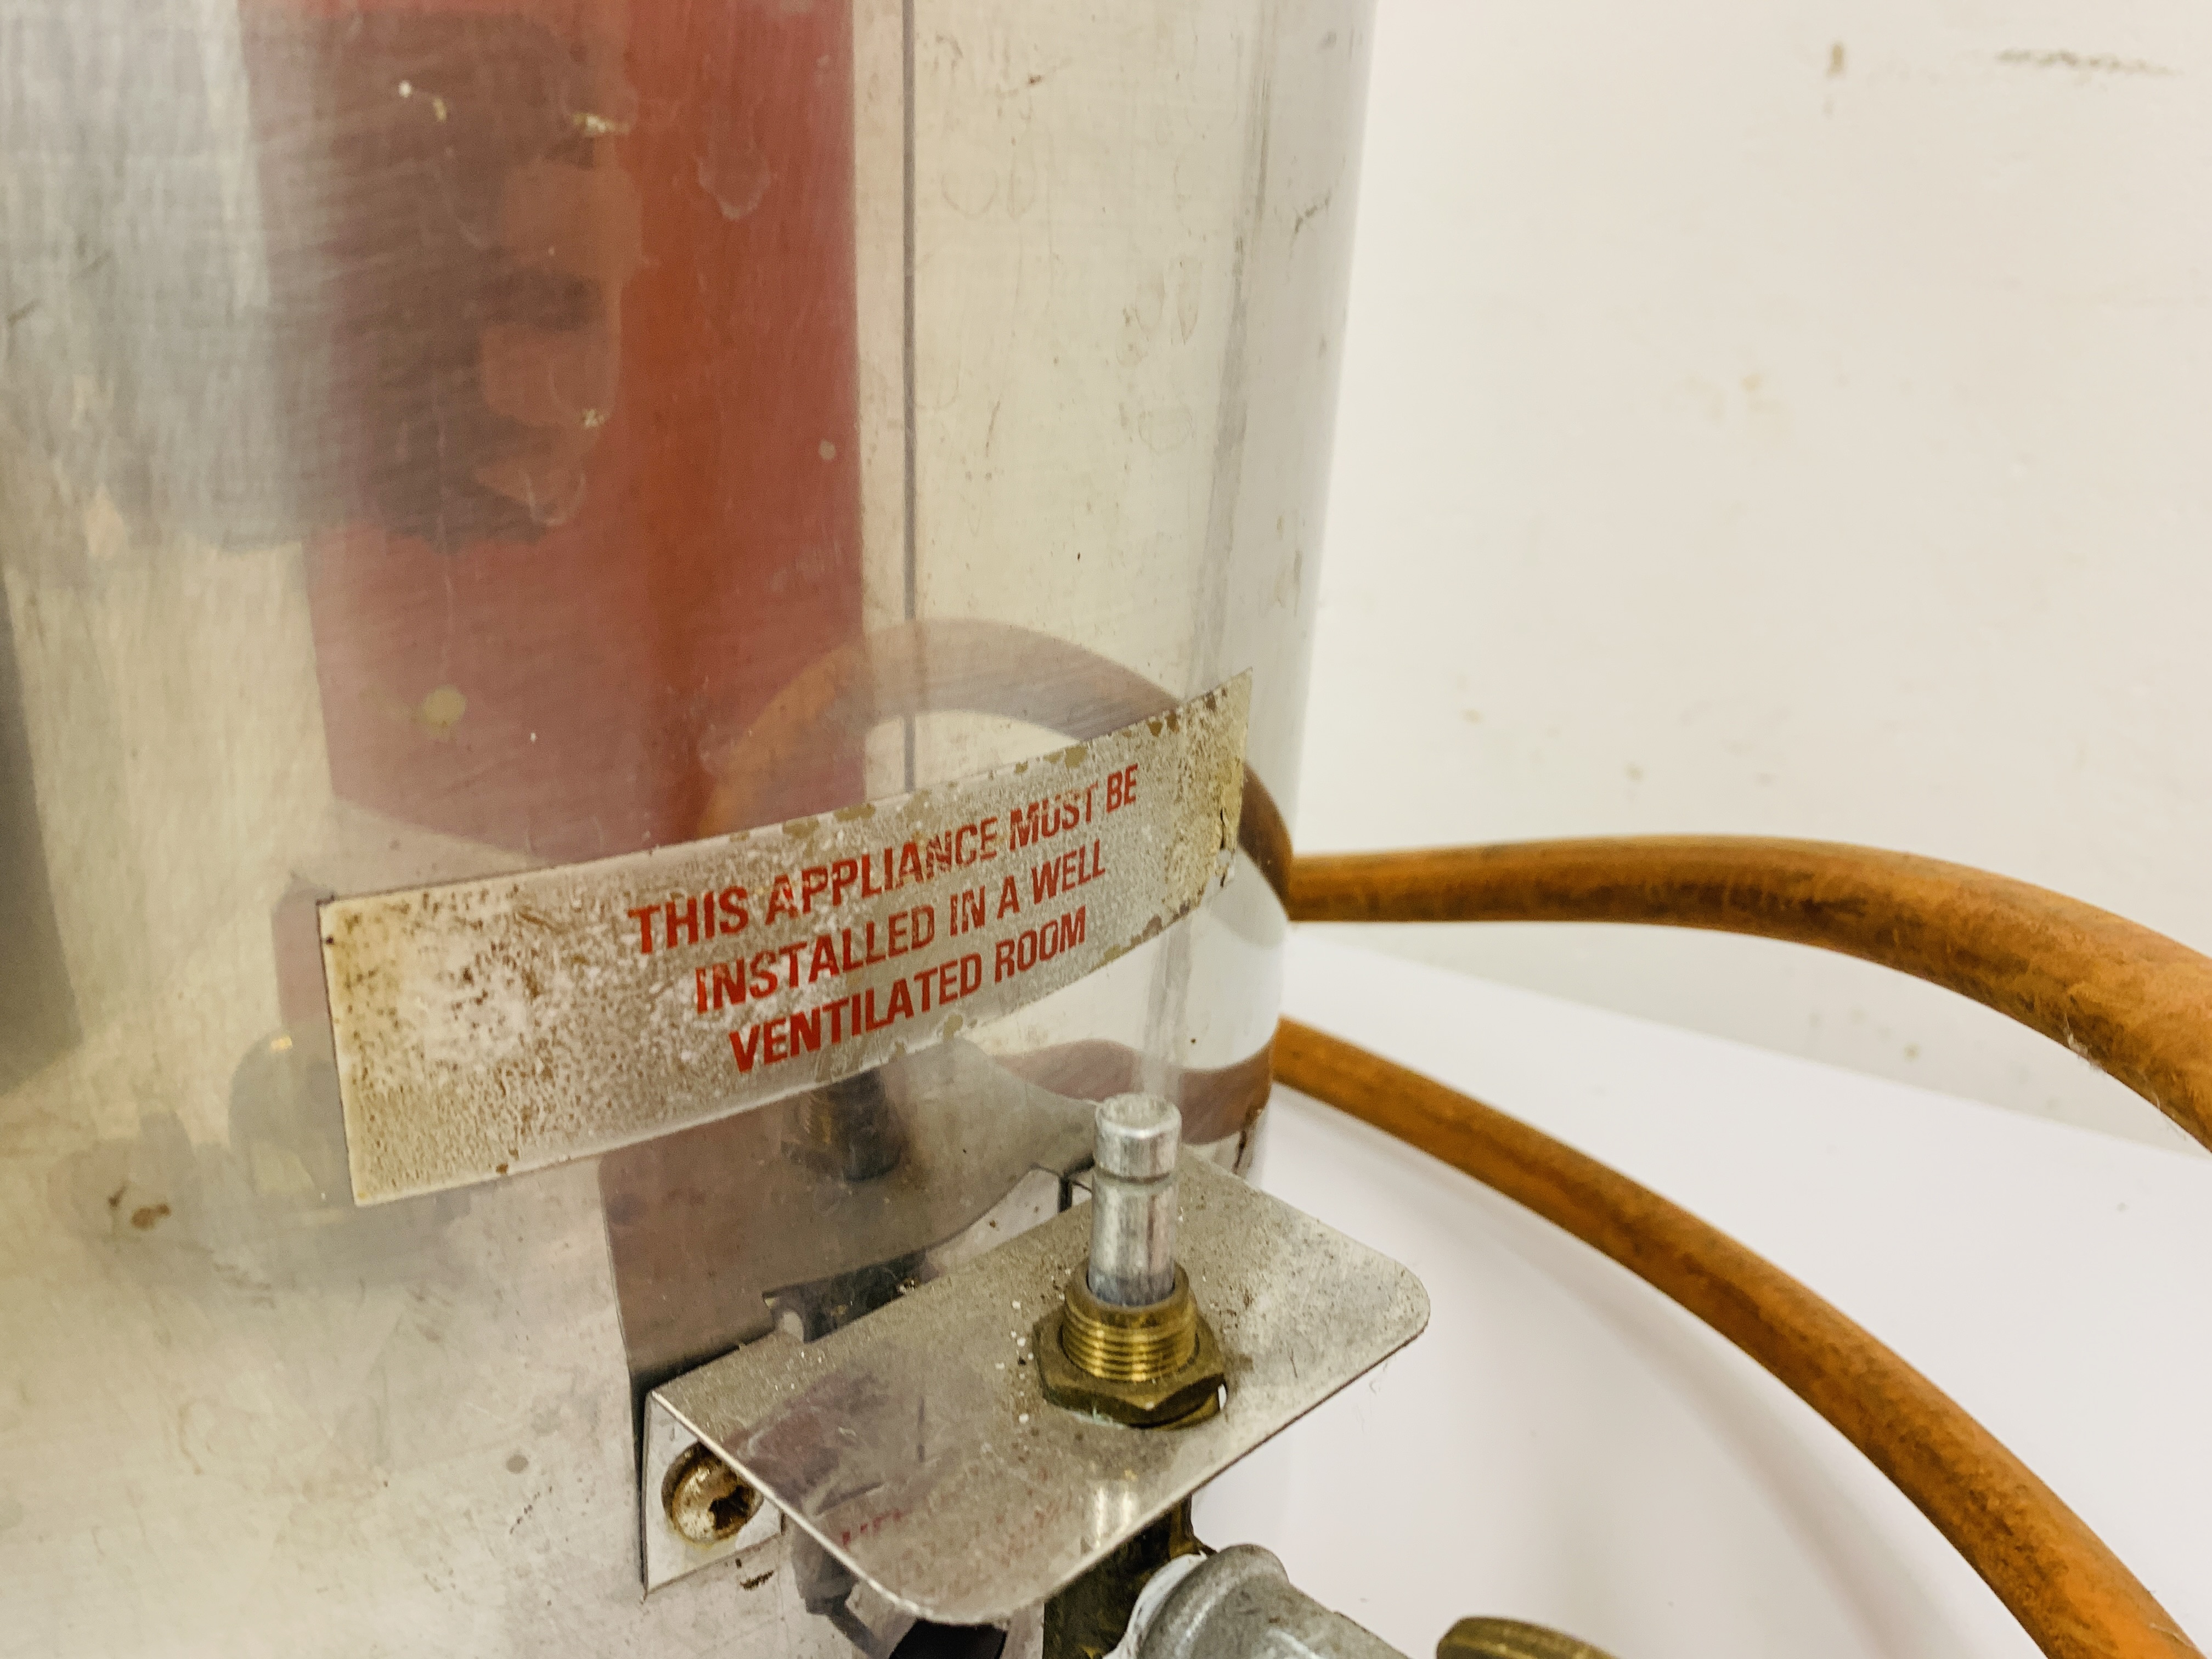 A STAINLESS STEEL DEAN CATERING GAS WATER BOILER - Image 5 of 6